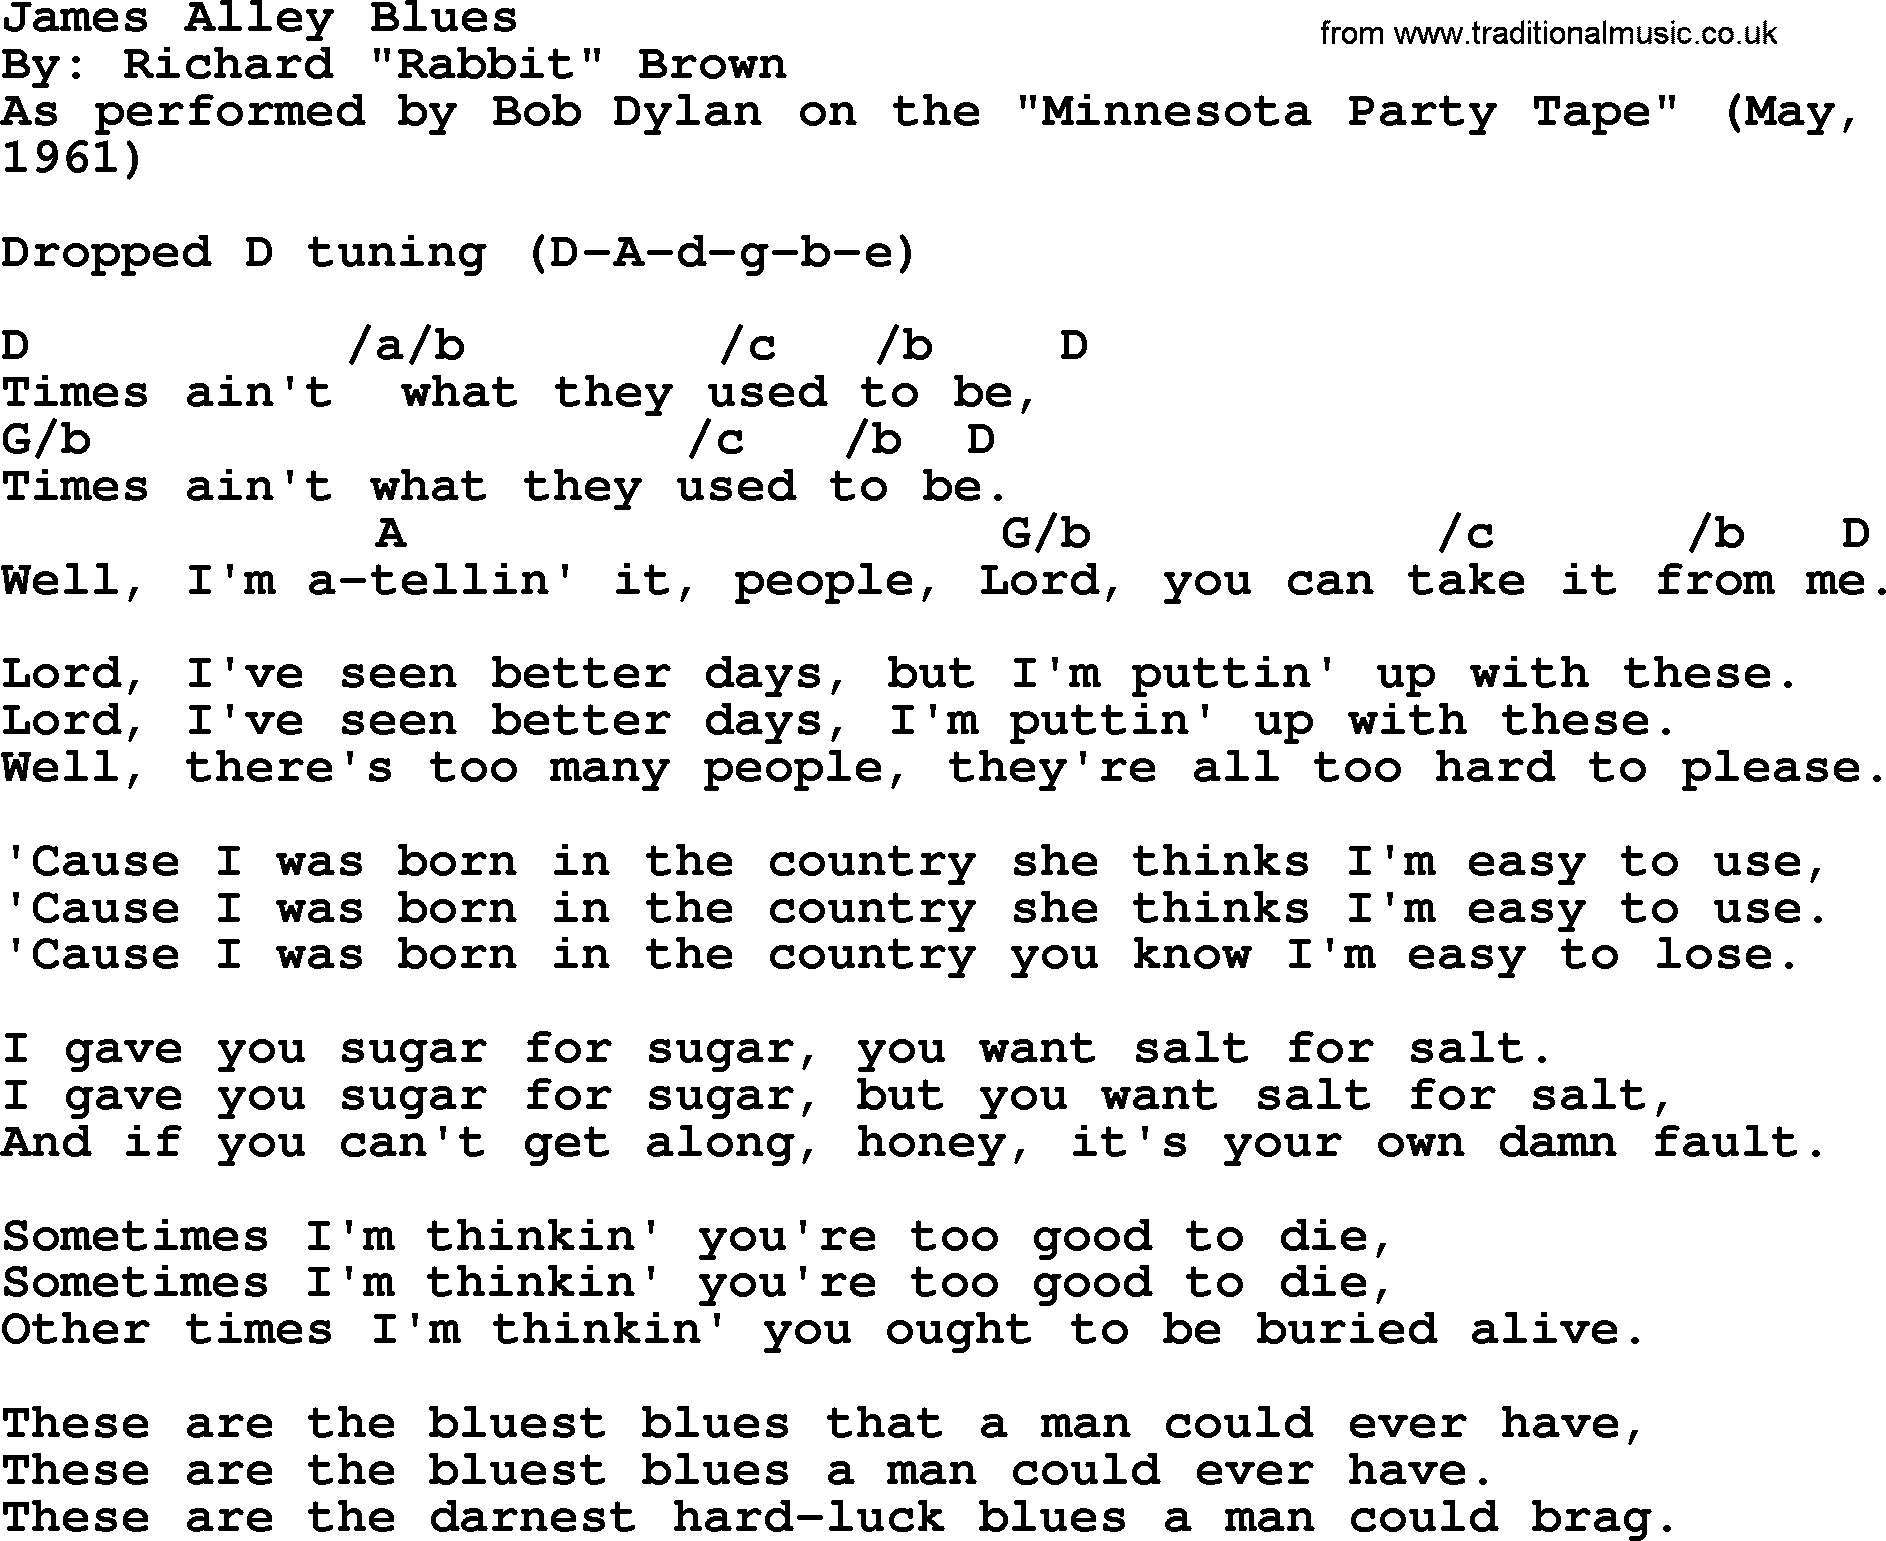 Bob Dylan song, lyrics with chords - James Alley Blues